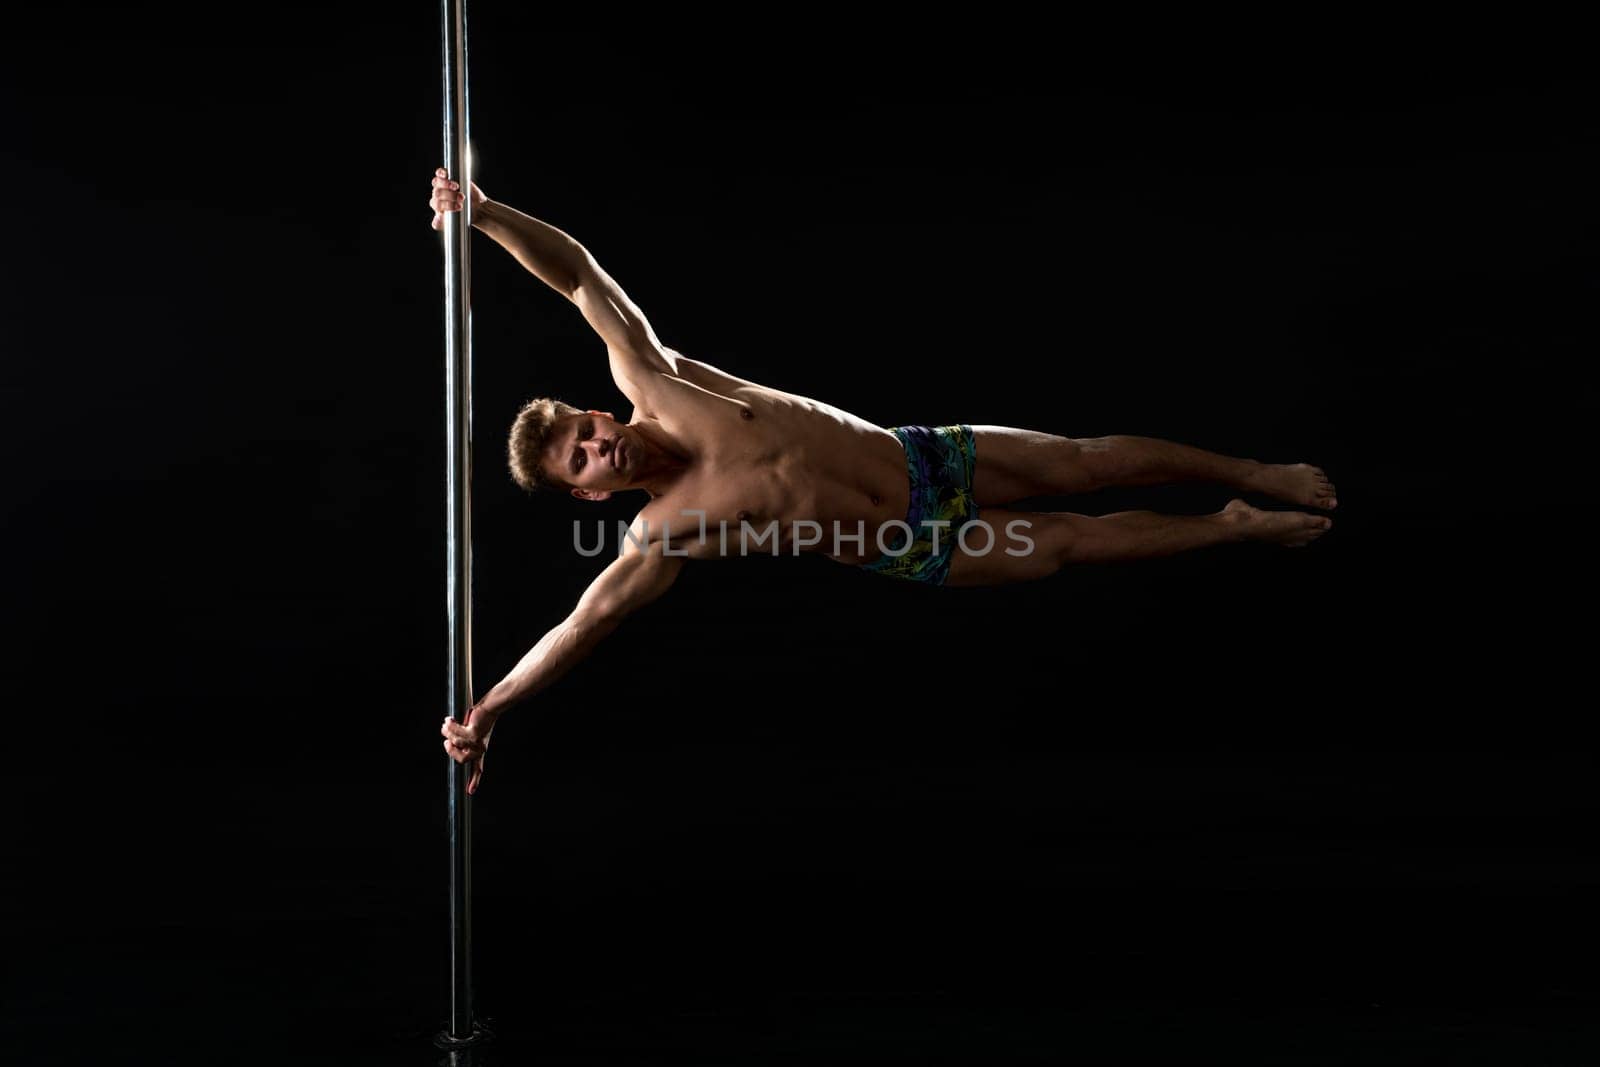 Male pole dance. Image of dancer with strained face